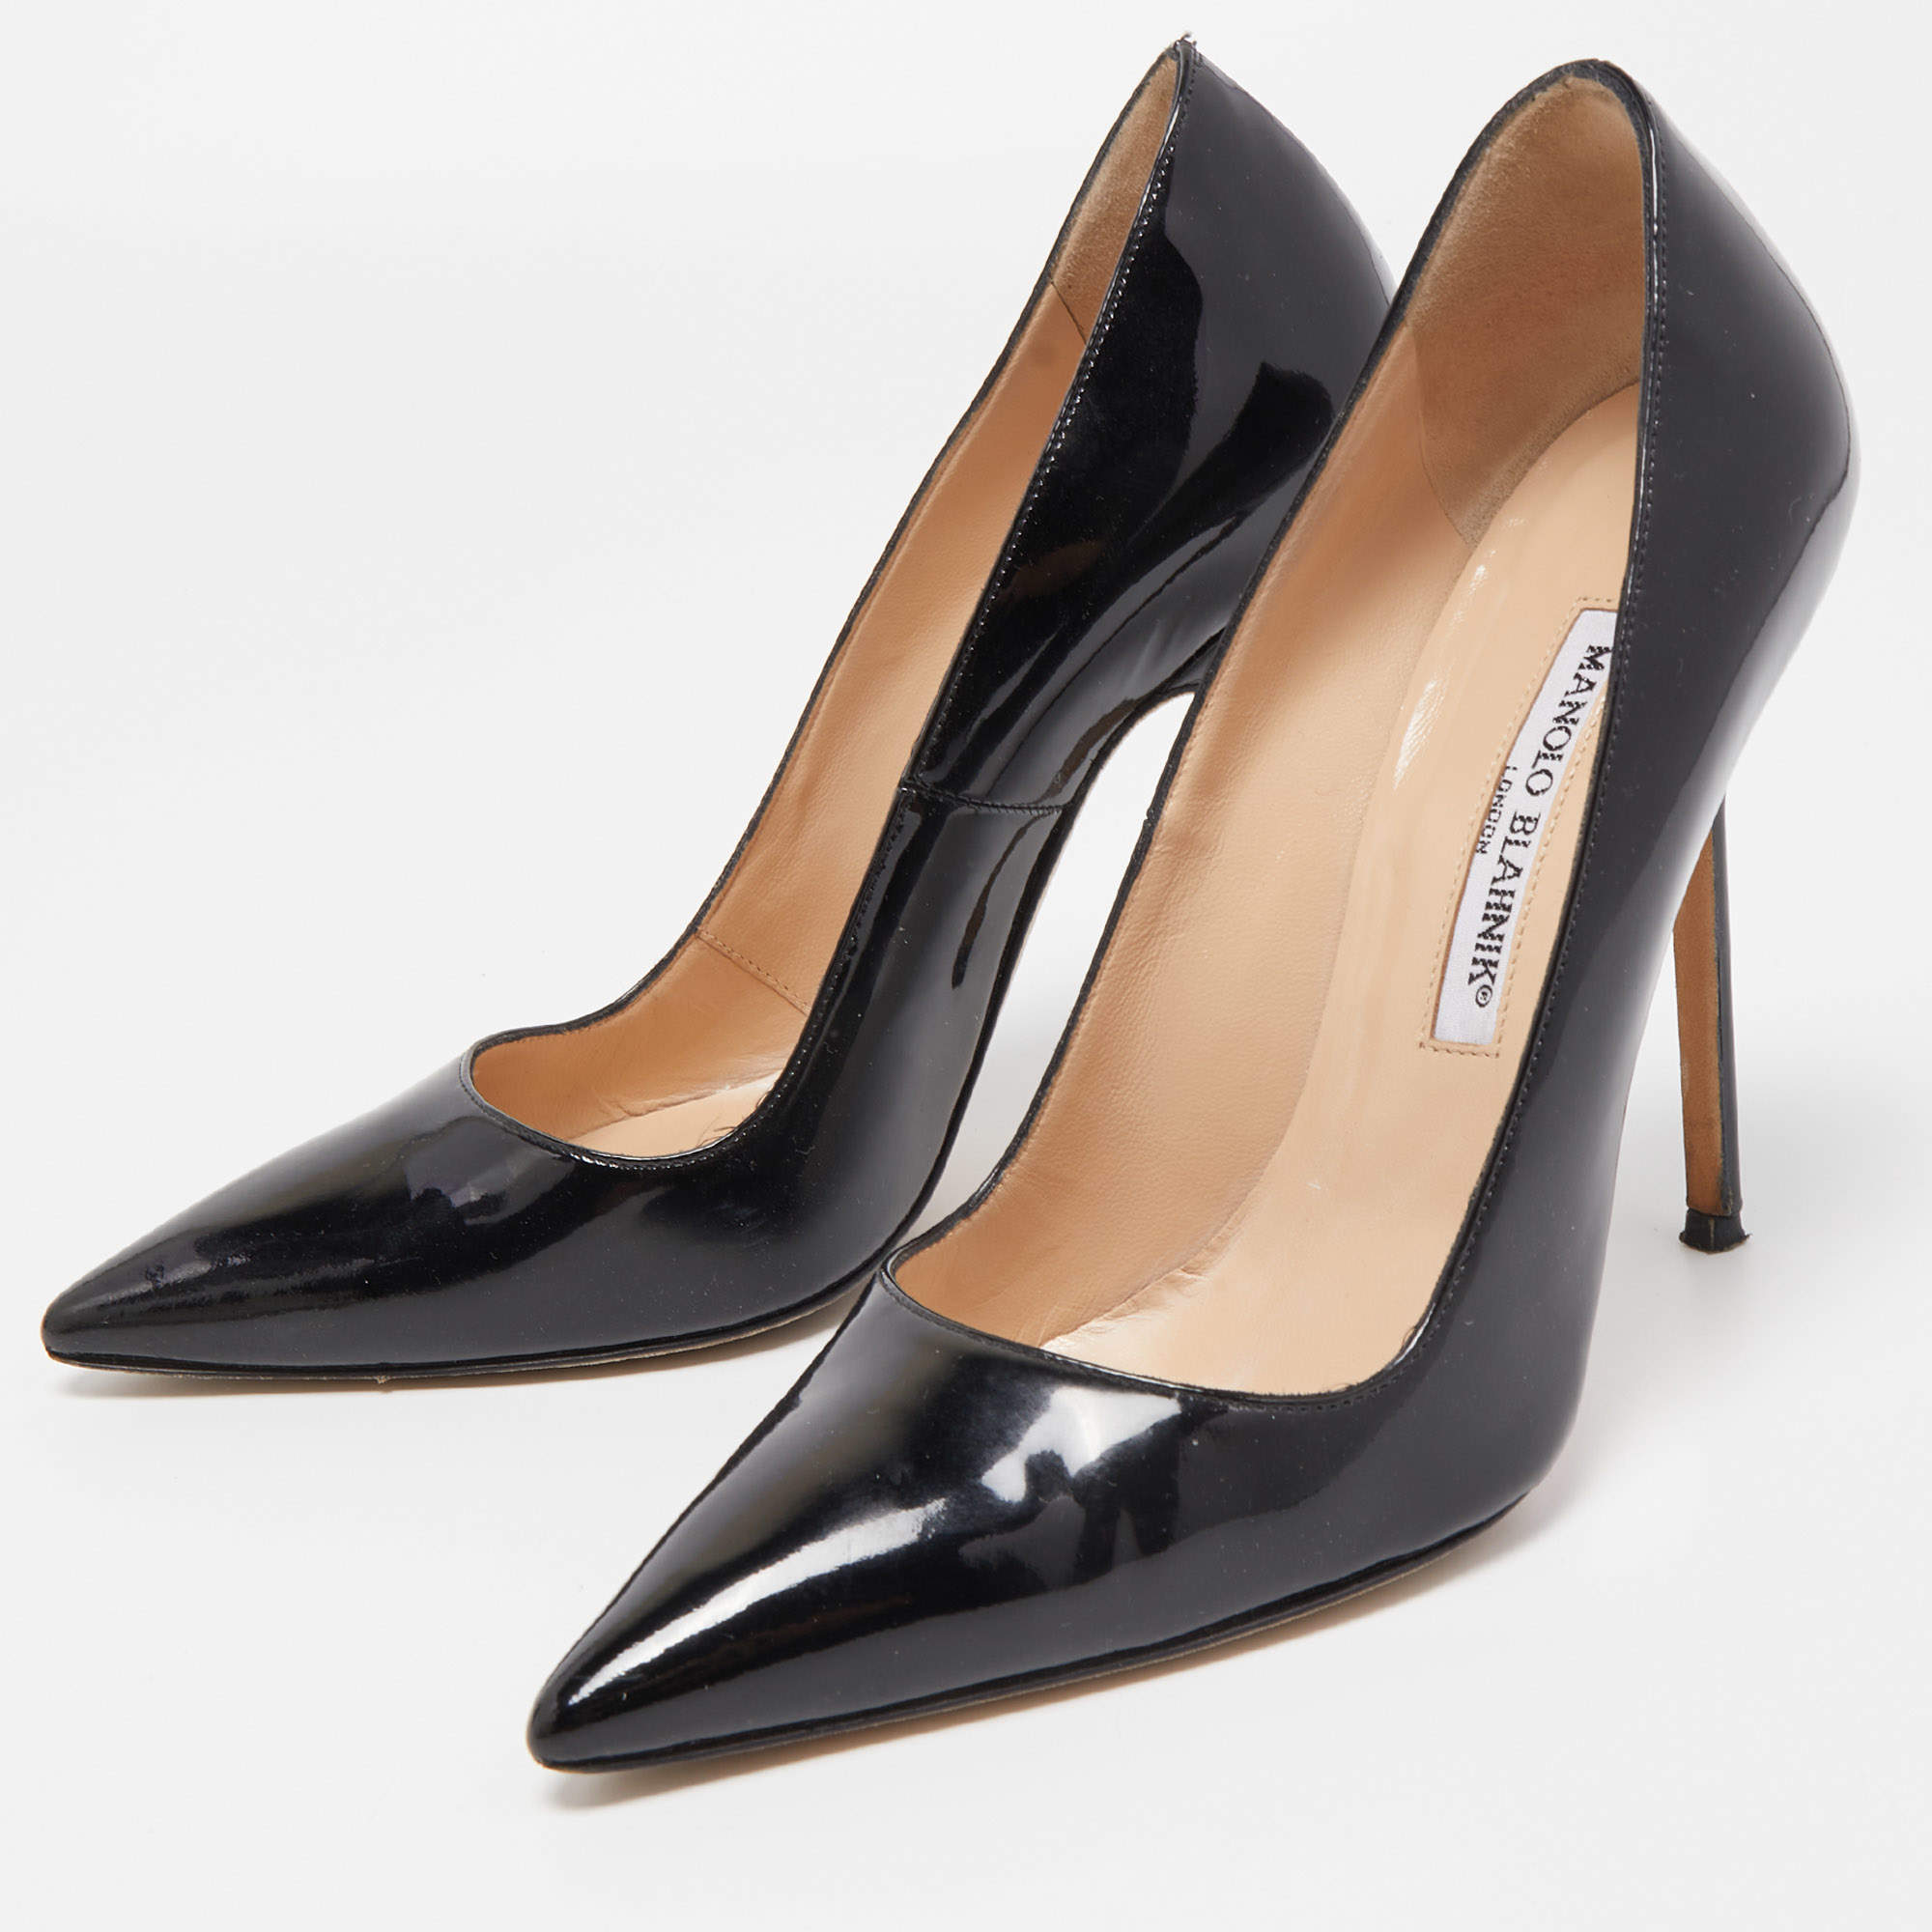 Manolo Blahnik Black Patent Leather BB Pointed Toe Pumps Size 36